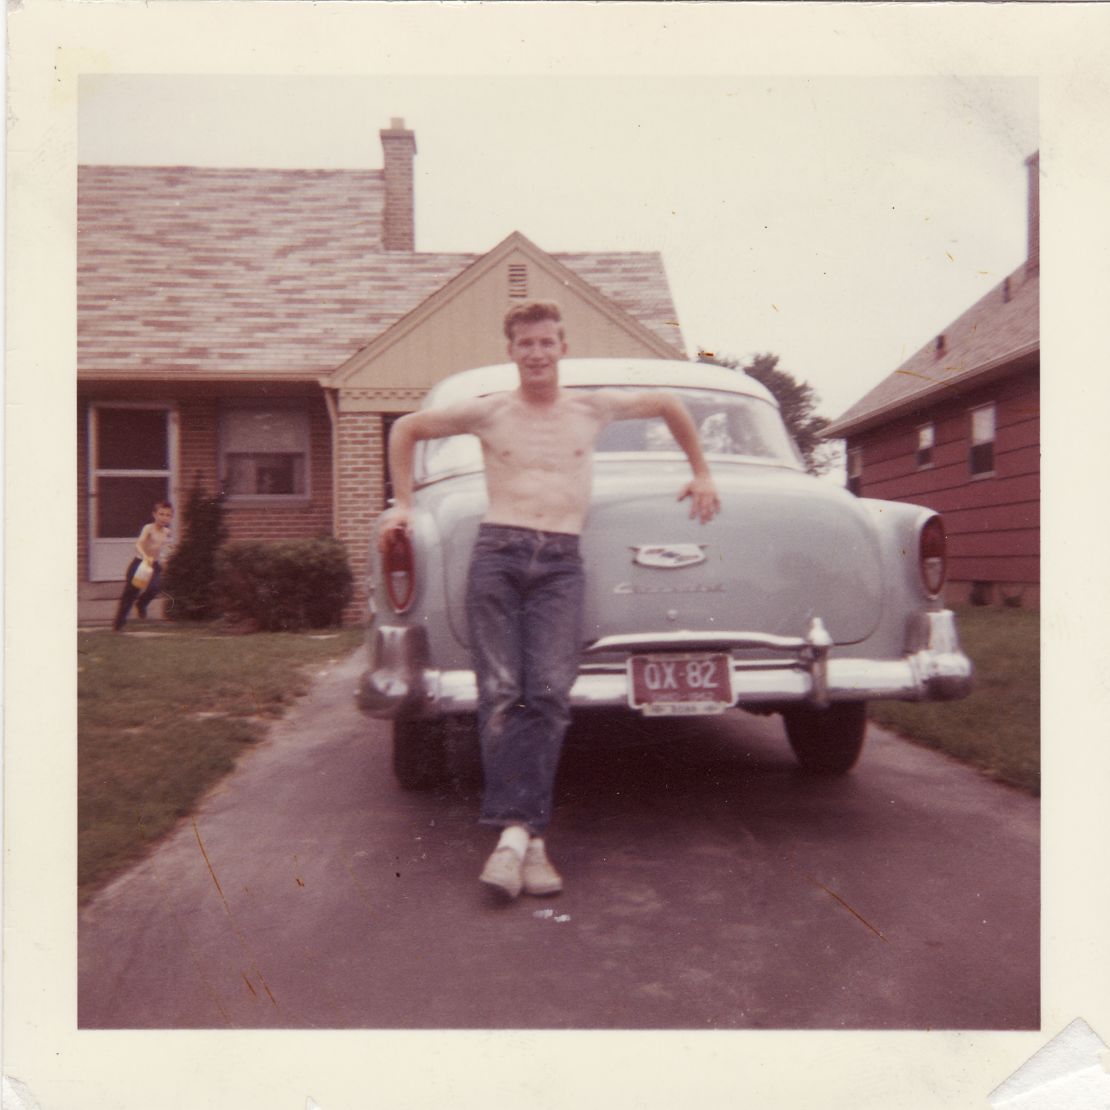 Brian McDaniels, 18, stands in front of his 1954 Chevy Bel Air.